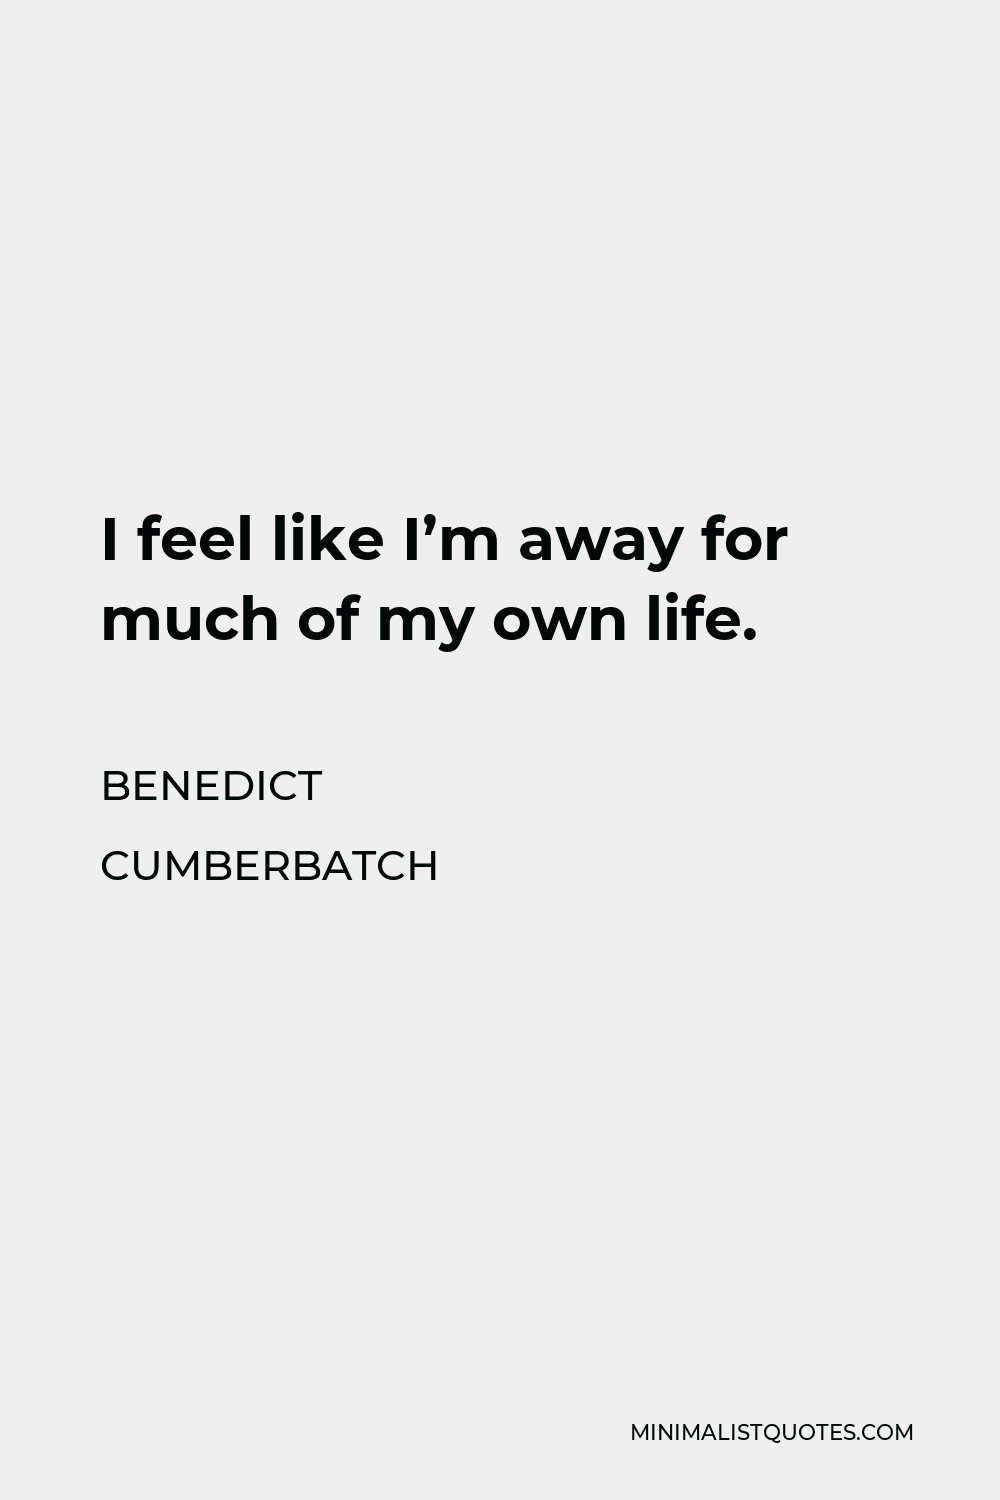 Benedict Cumberbatch Quote - I feel like I’m away for much of my own life.